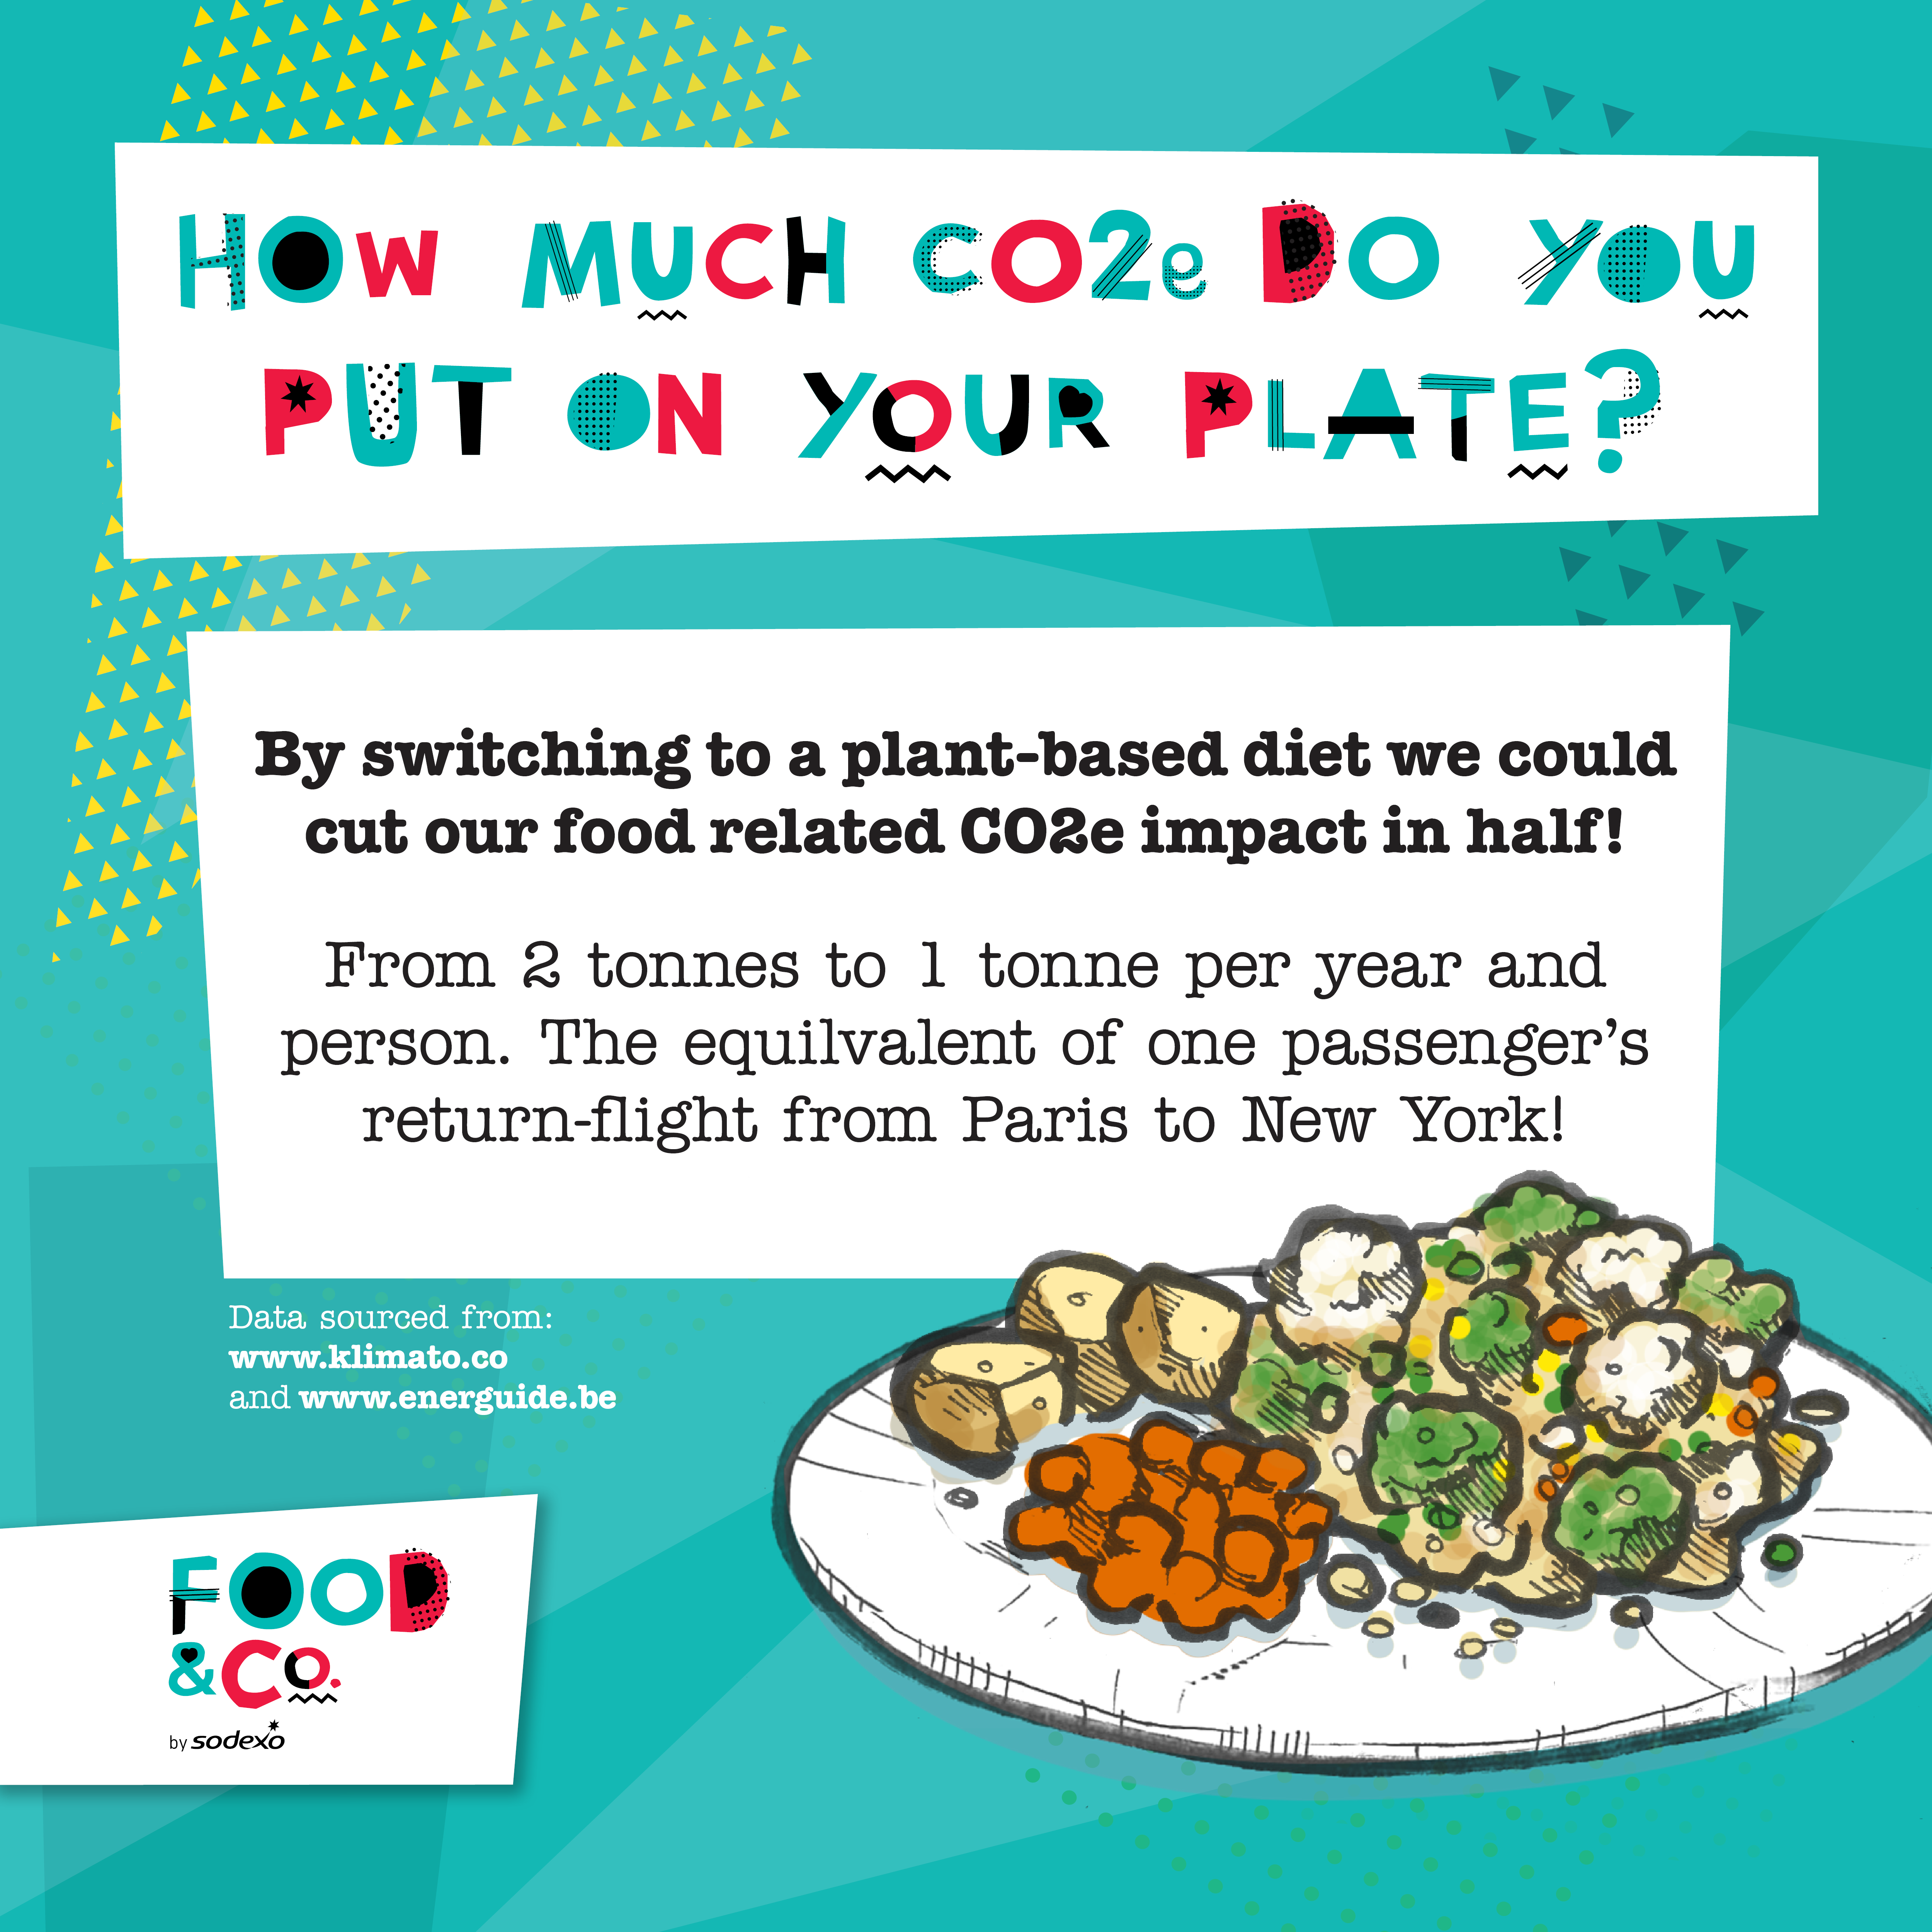 Switching to a plant-based diet can cut our food related CO2 impact in half